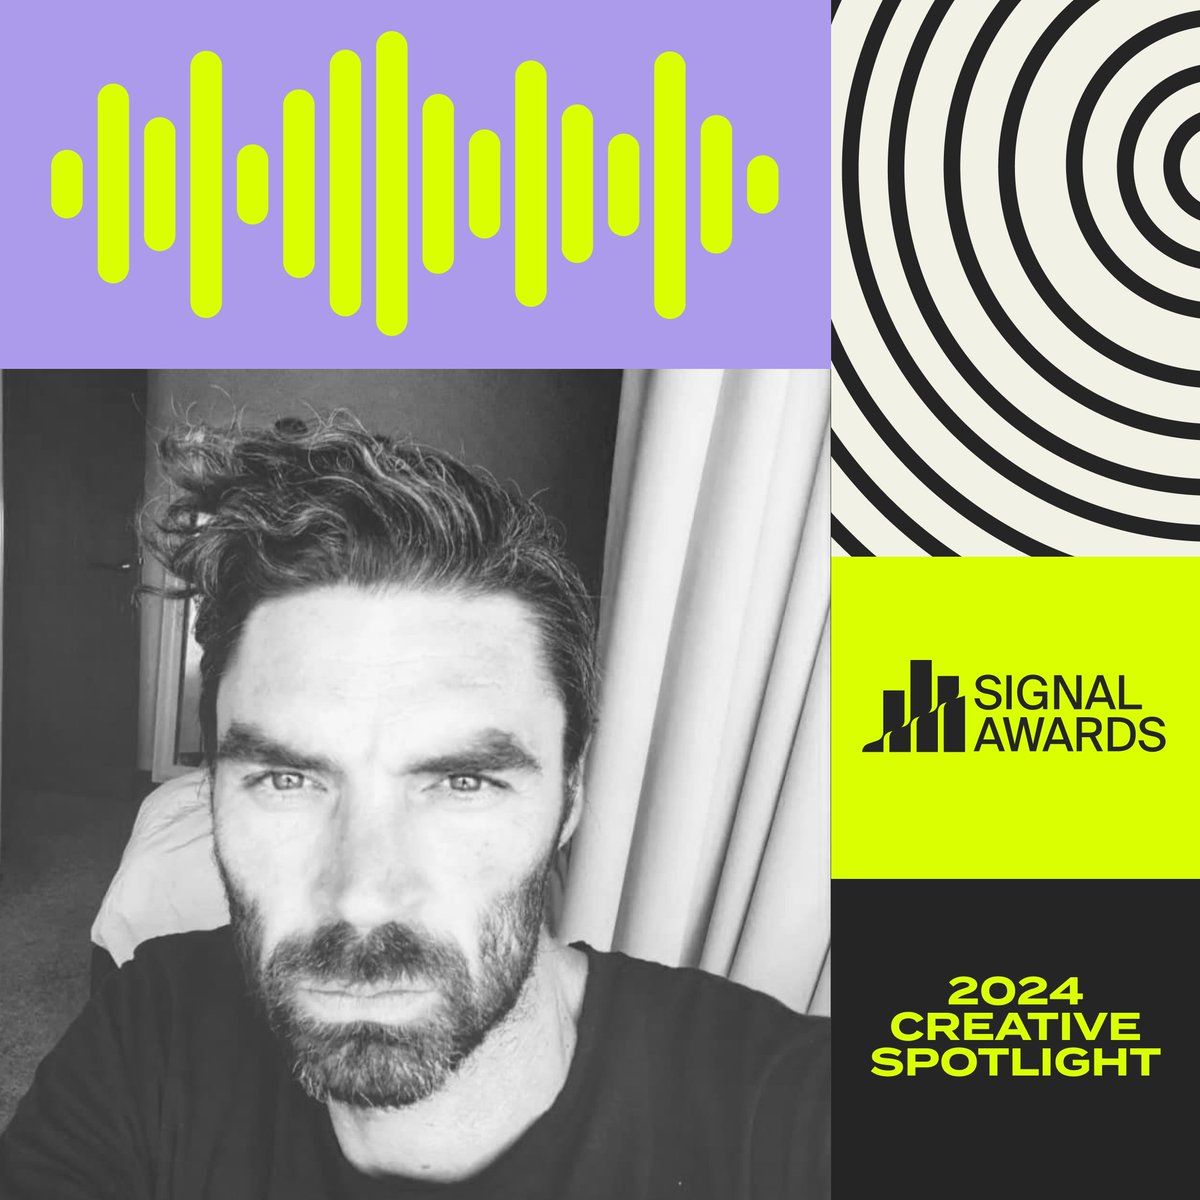 We're shining a creative spotlight on Nick Barclay, the designer of the new look for the 3rd season of the Signal Awards! Originally from the UK, Nick is currently based in Sydney, Australia. You can keep up with his work here: nickbarclaydesigns.com.